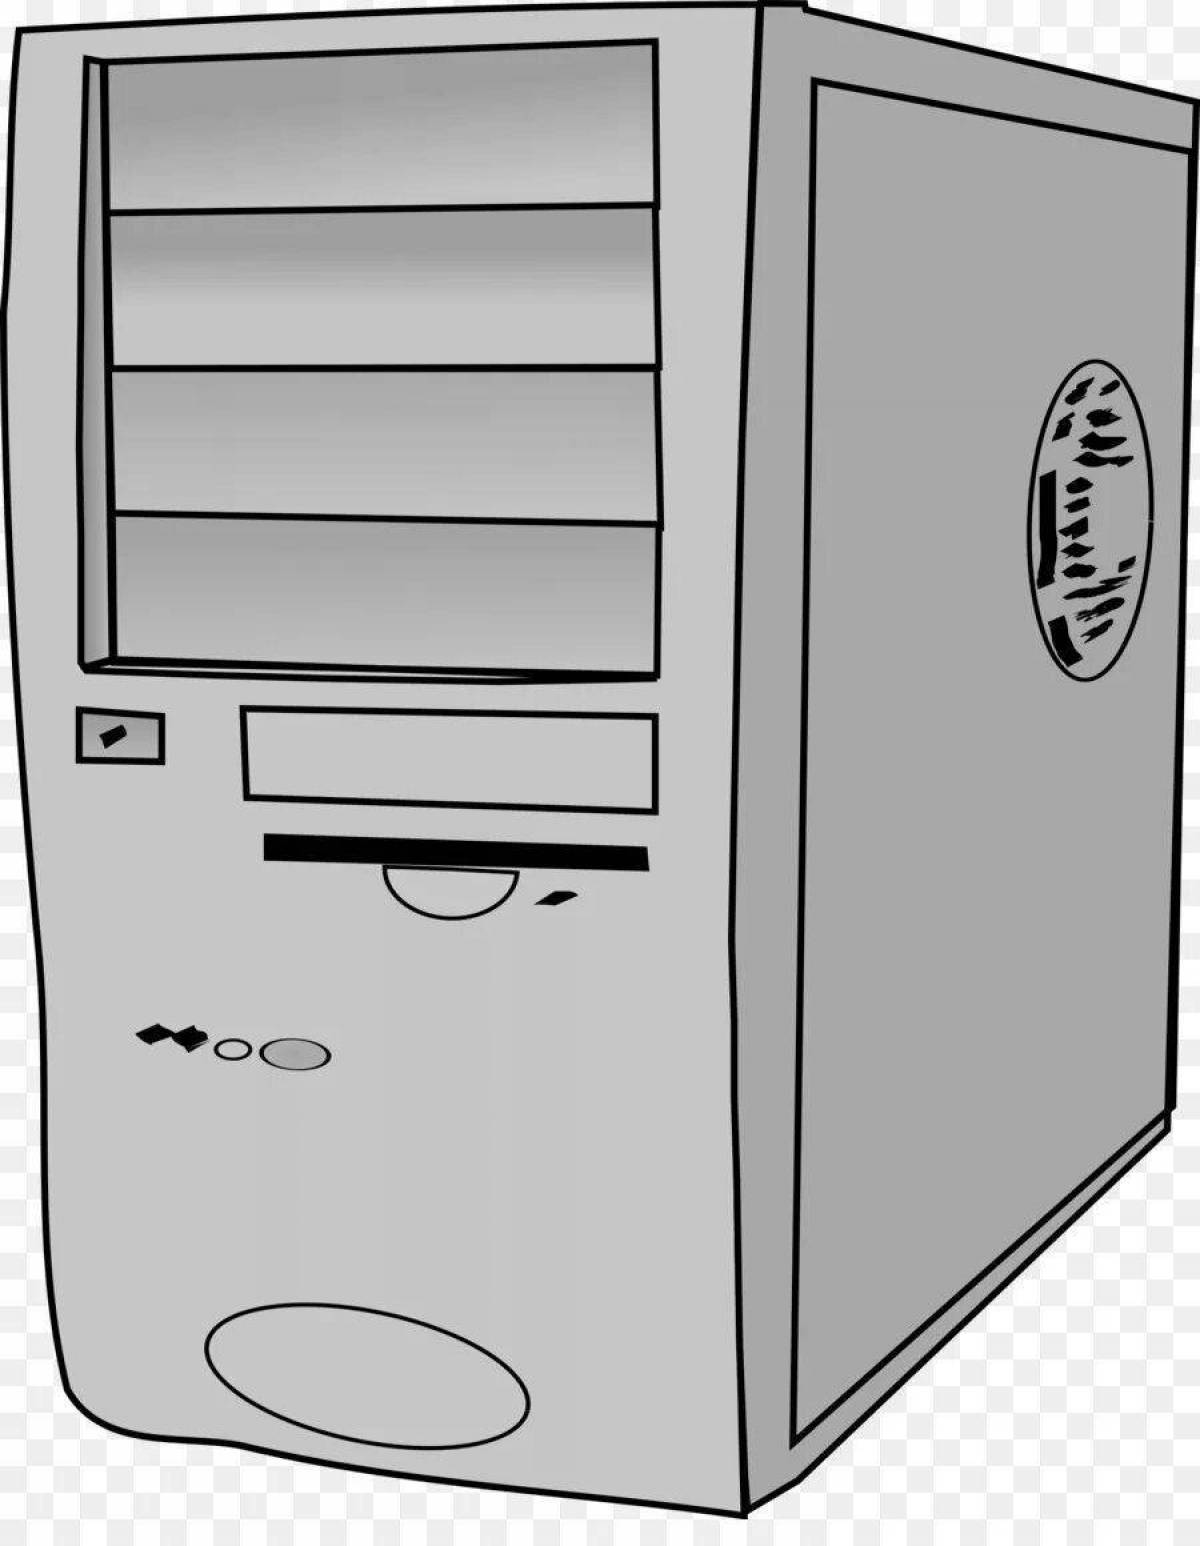 Amazing pc case coloring page